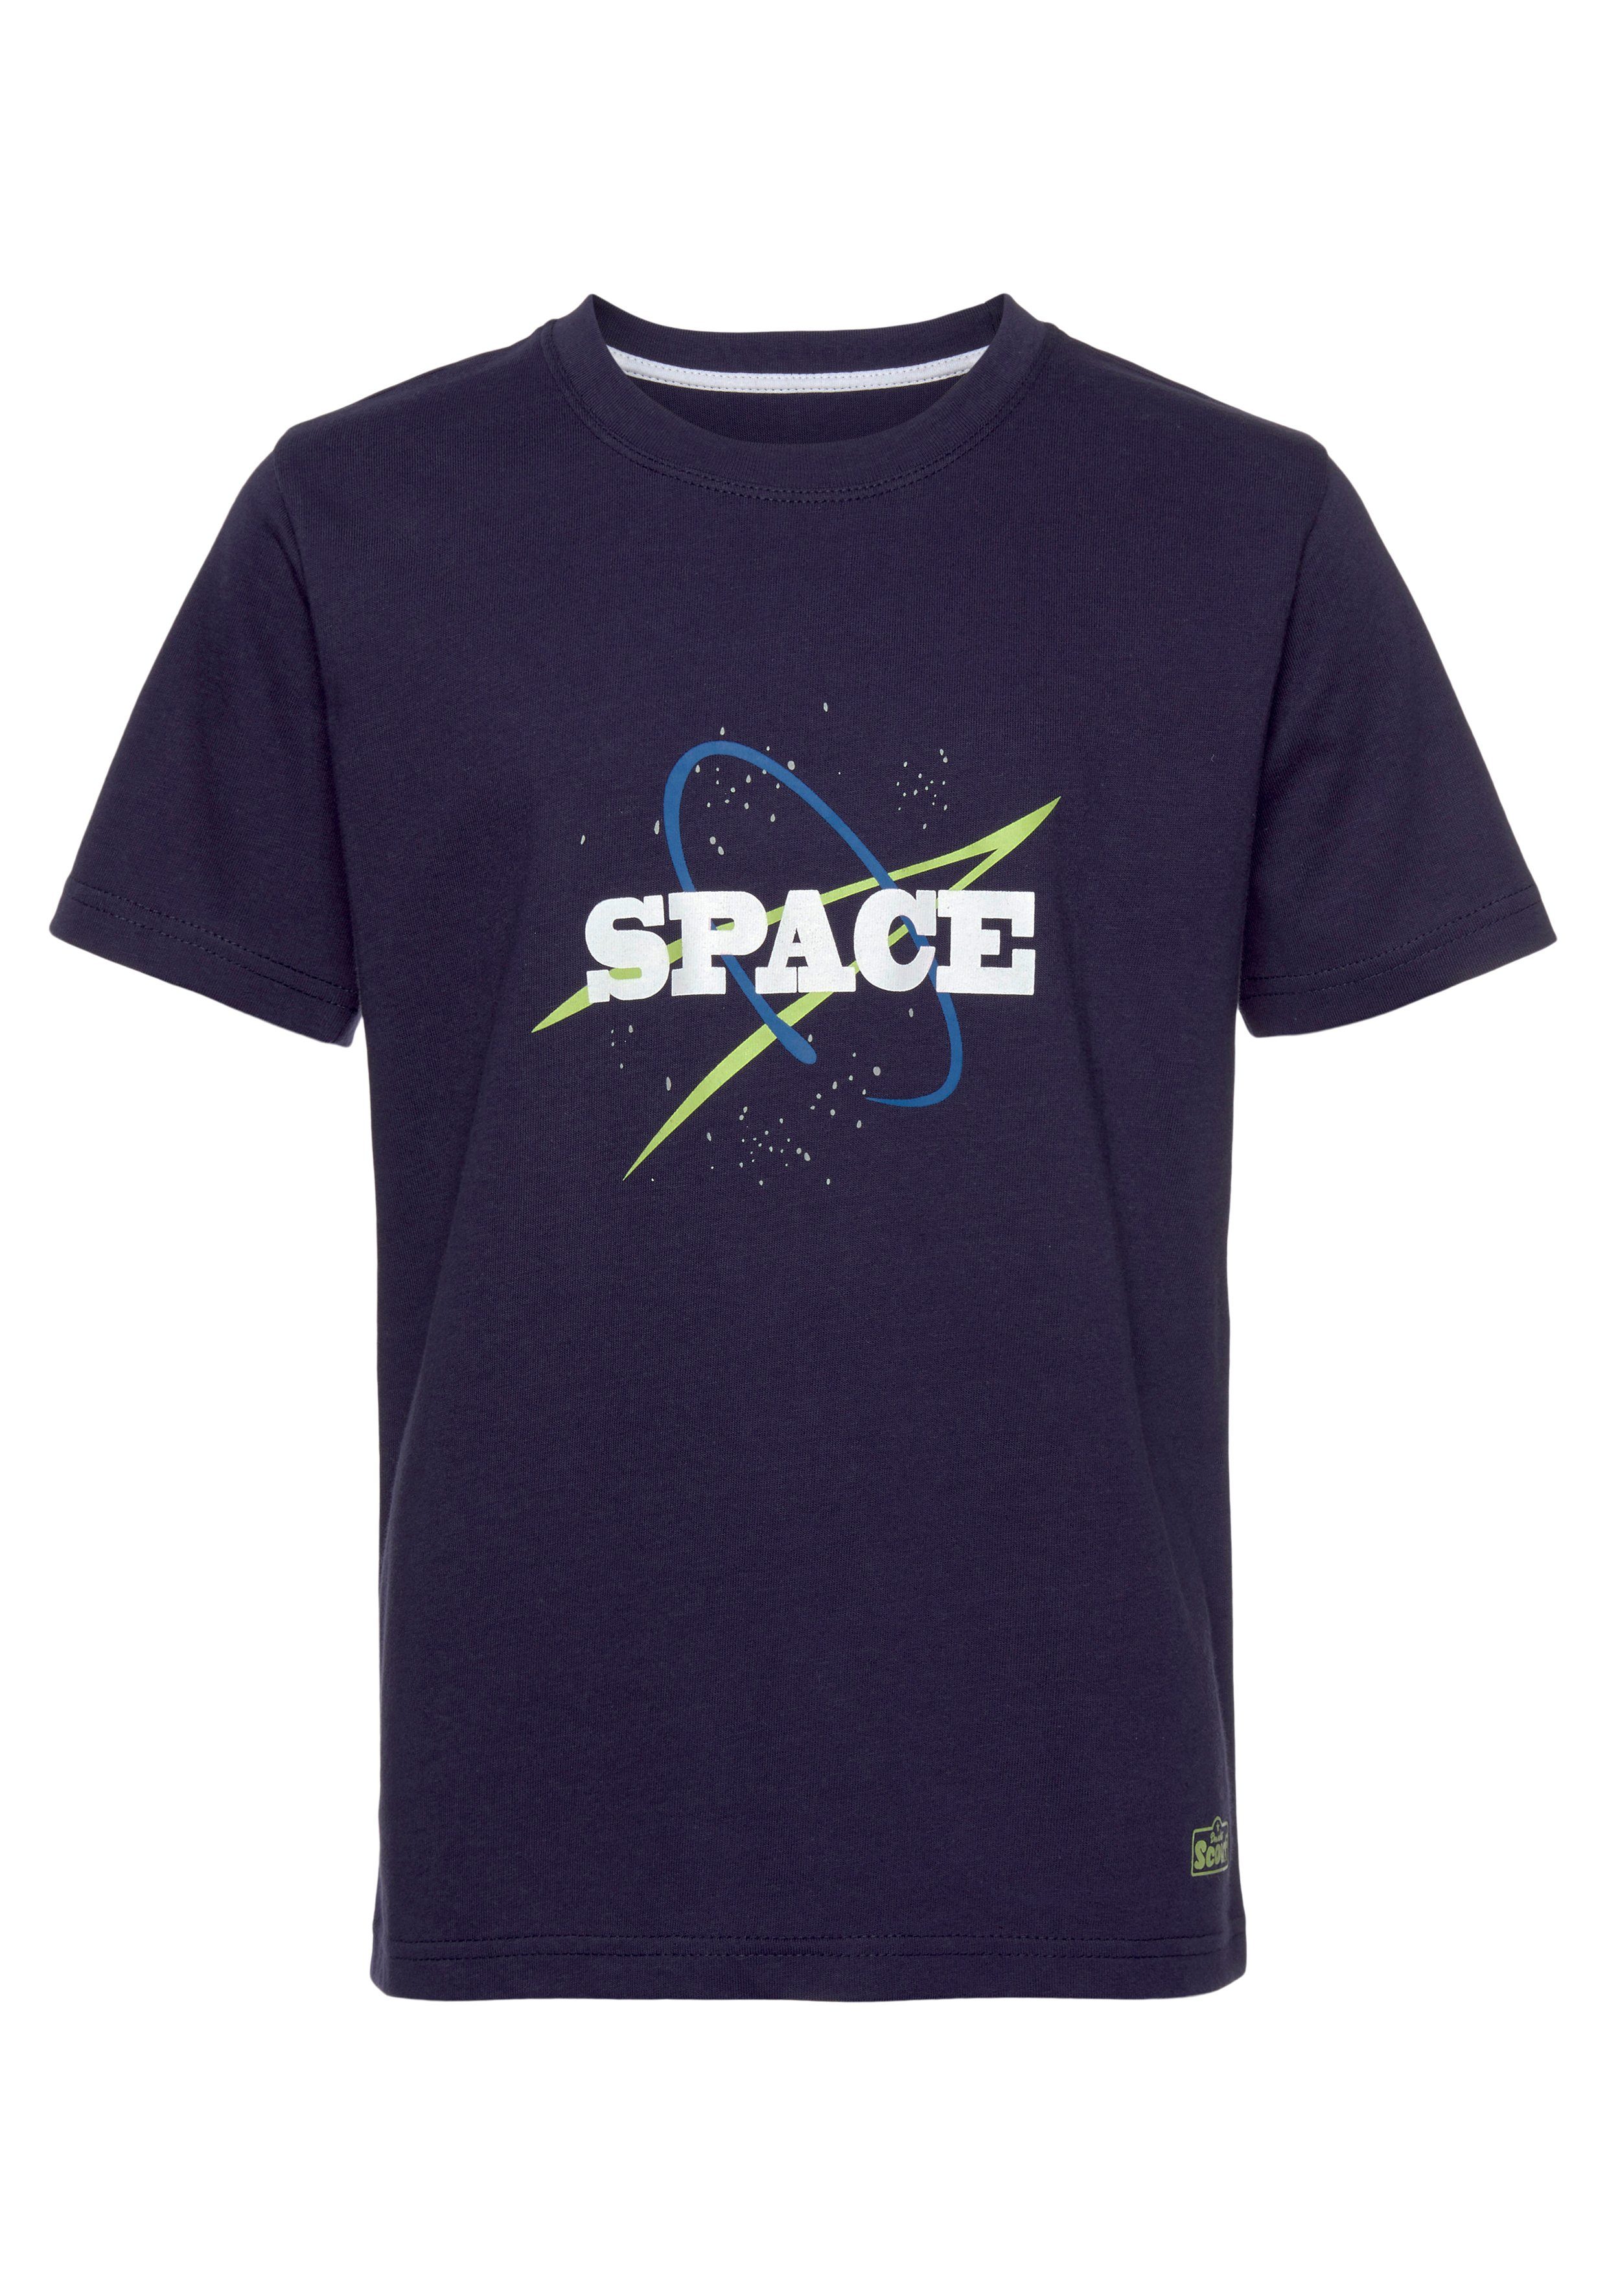 Scout T-Shirt SPACE Bio-Baumwolle (Packung, 2er-Pack) aus